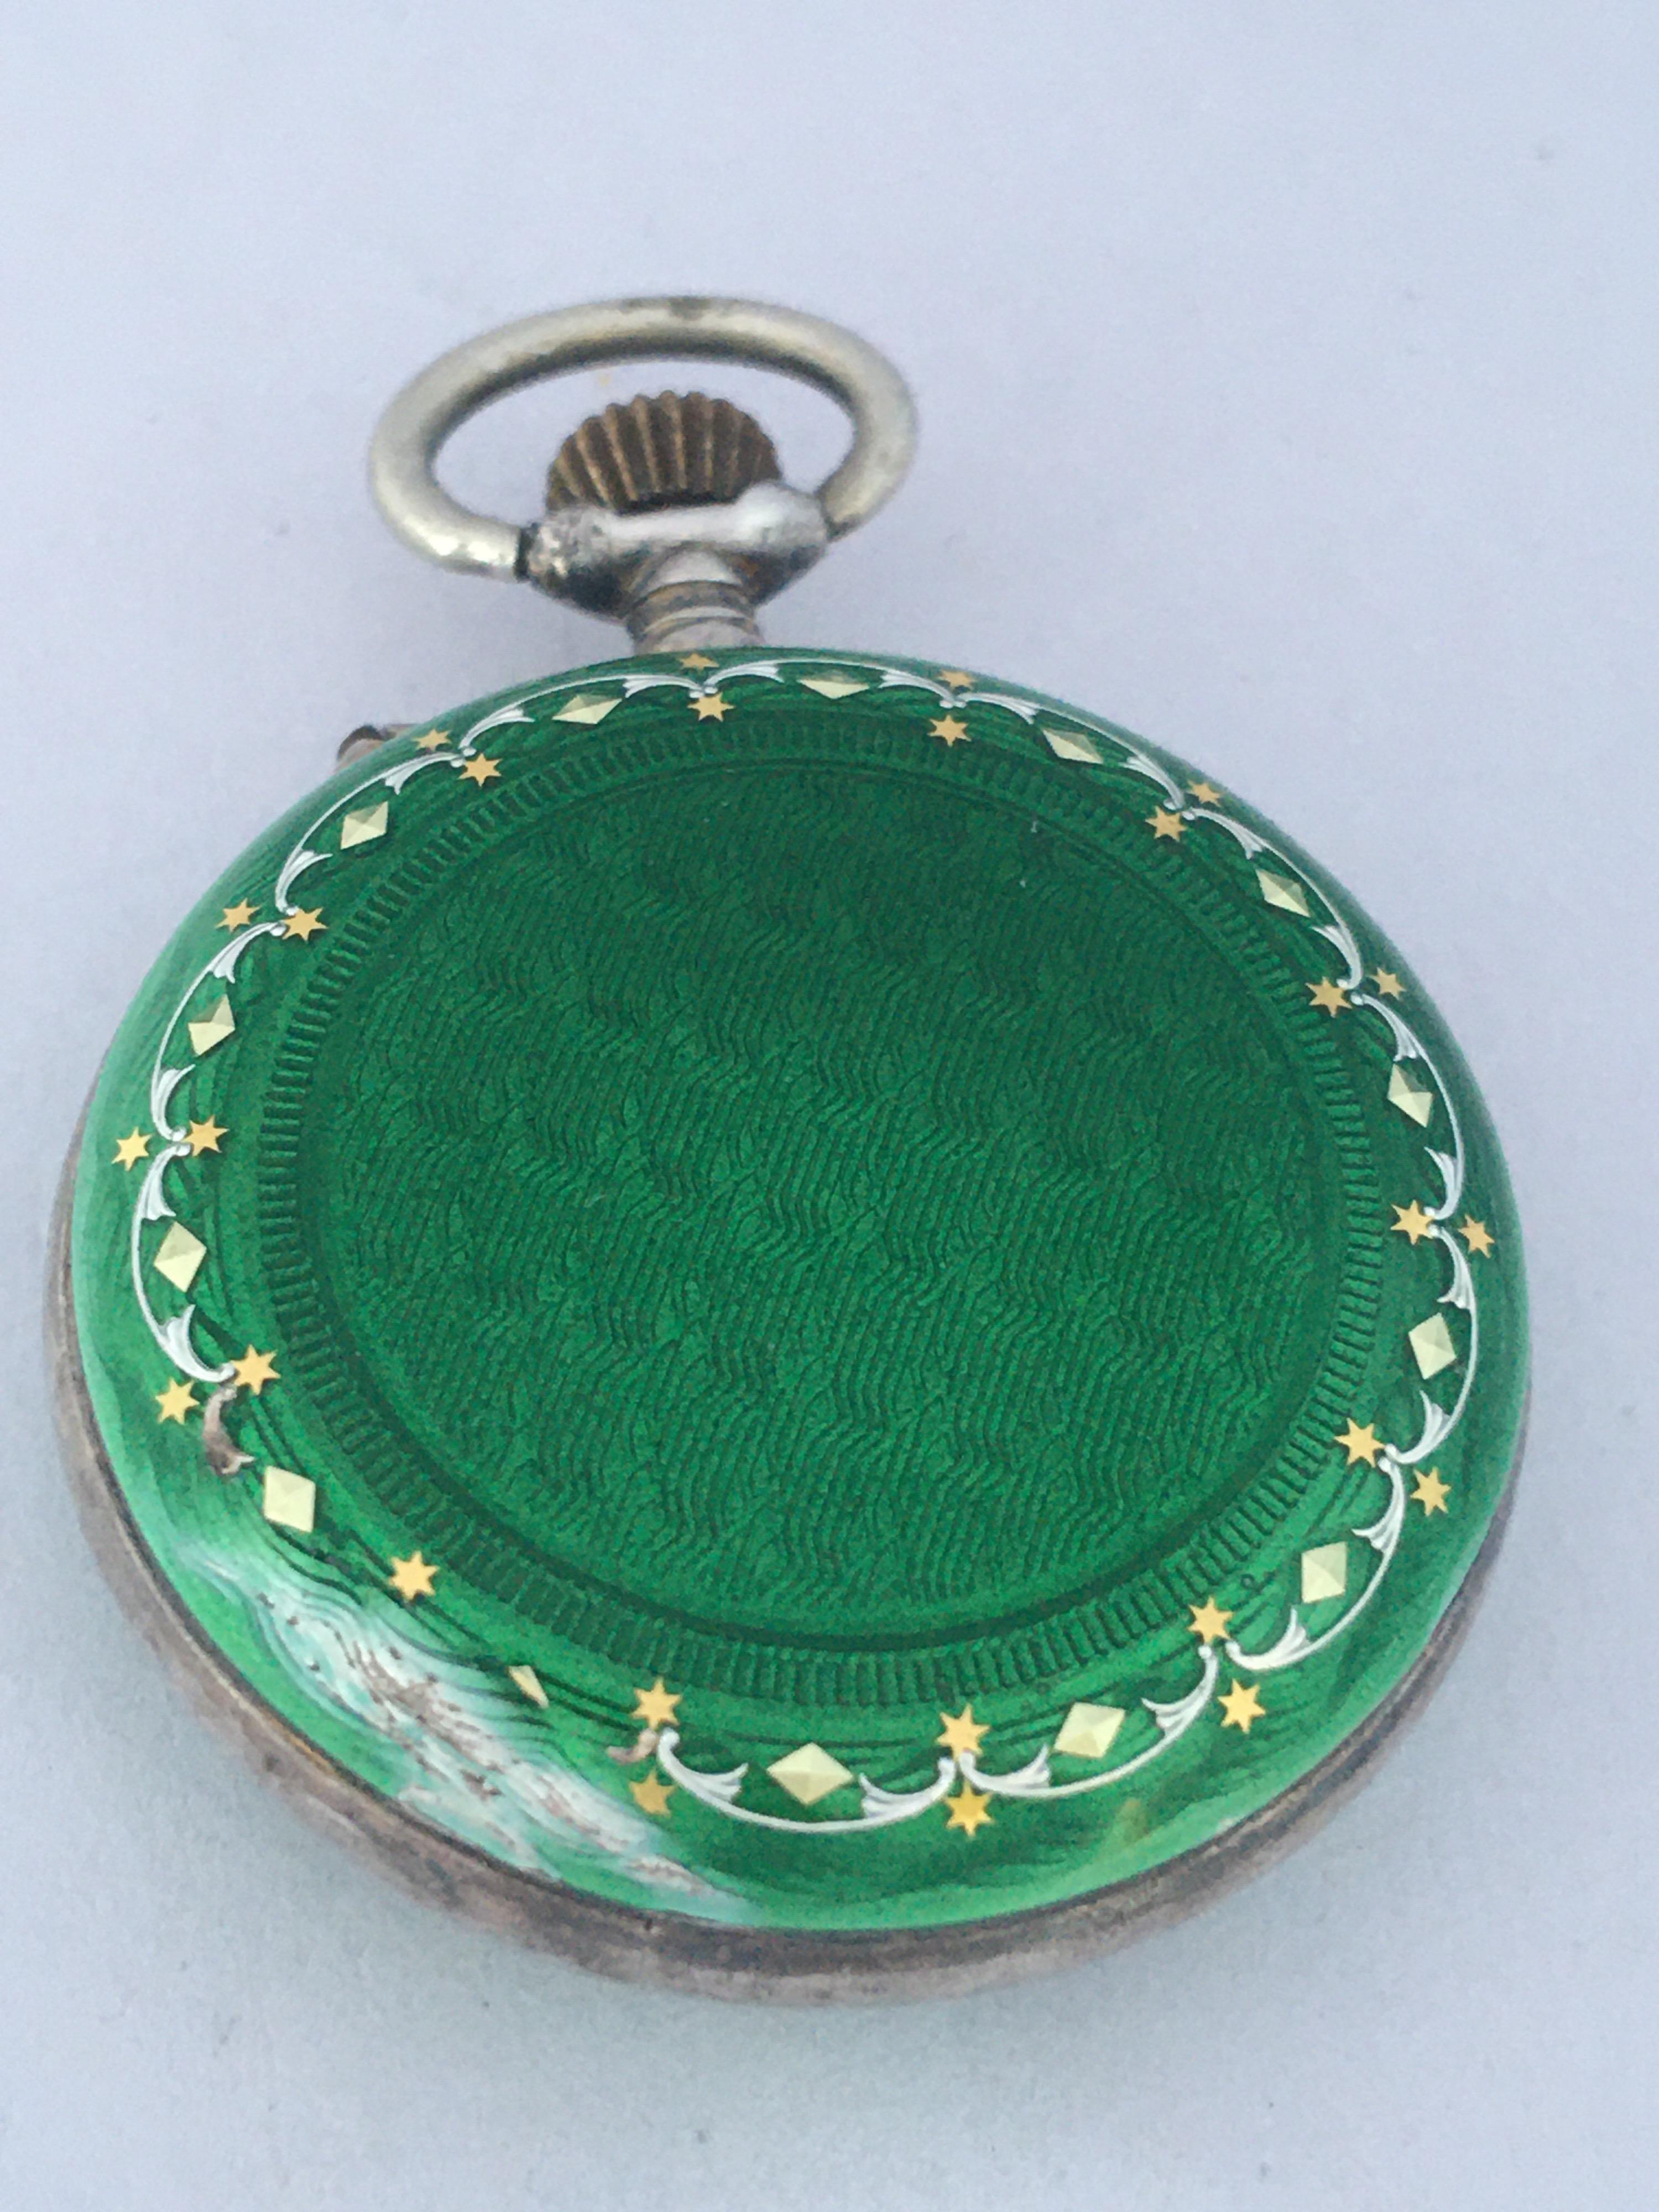 Antique Silver and Green Enamel Hand Winding Fob / Pocket Watch 3